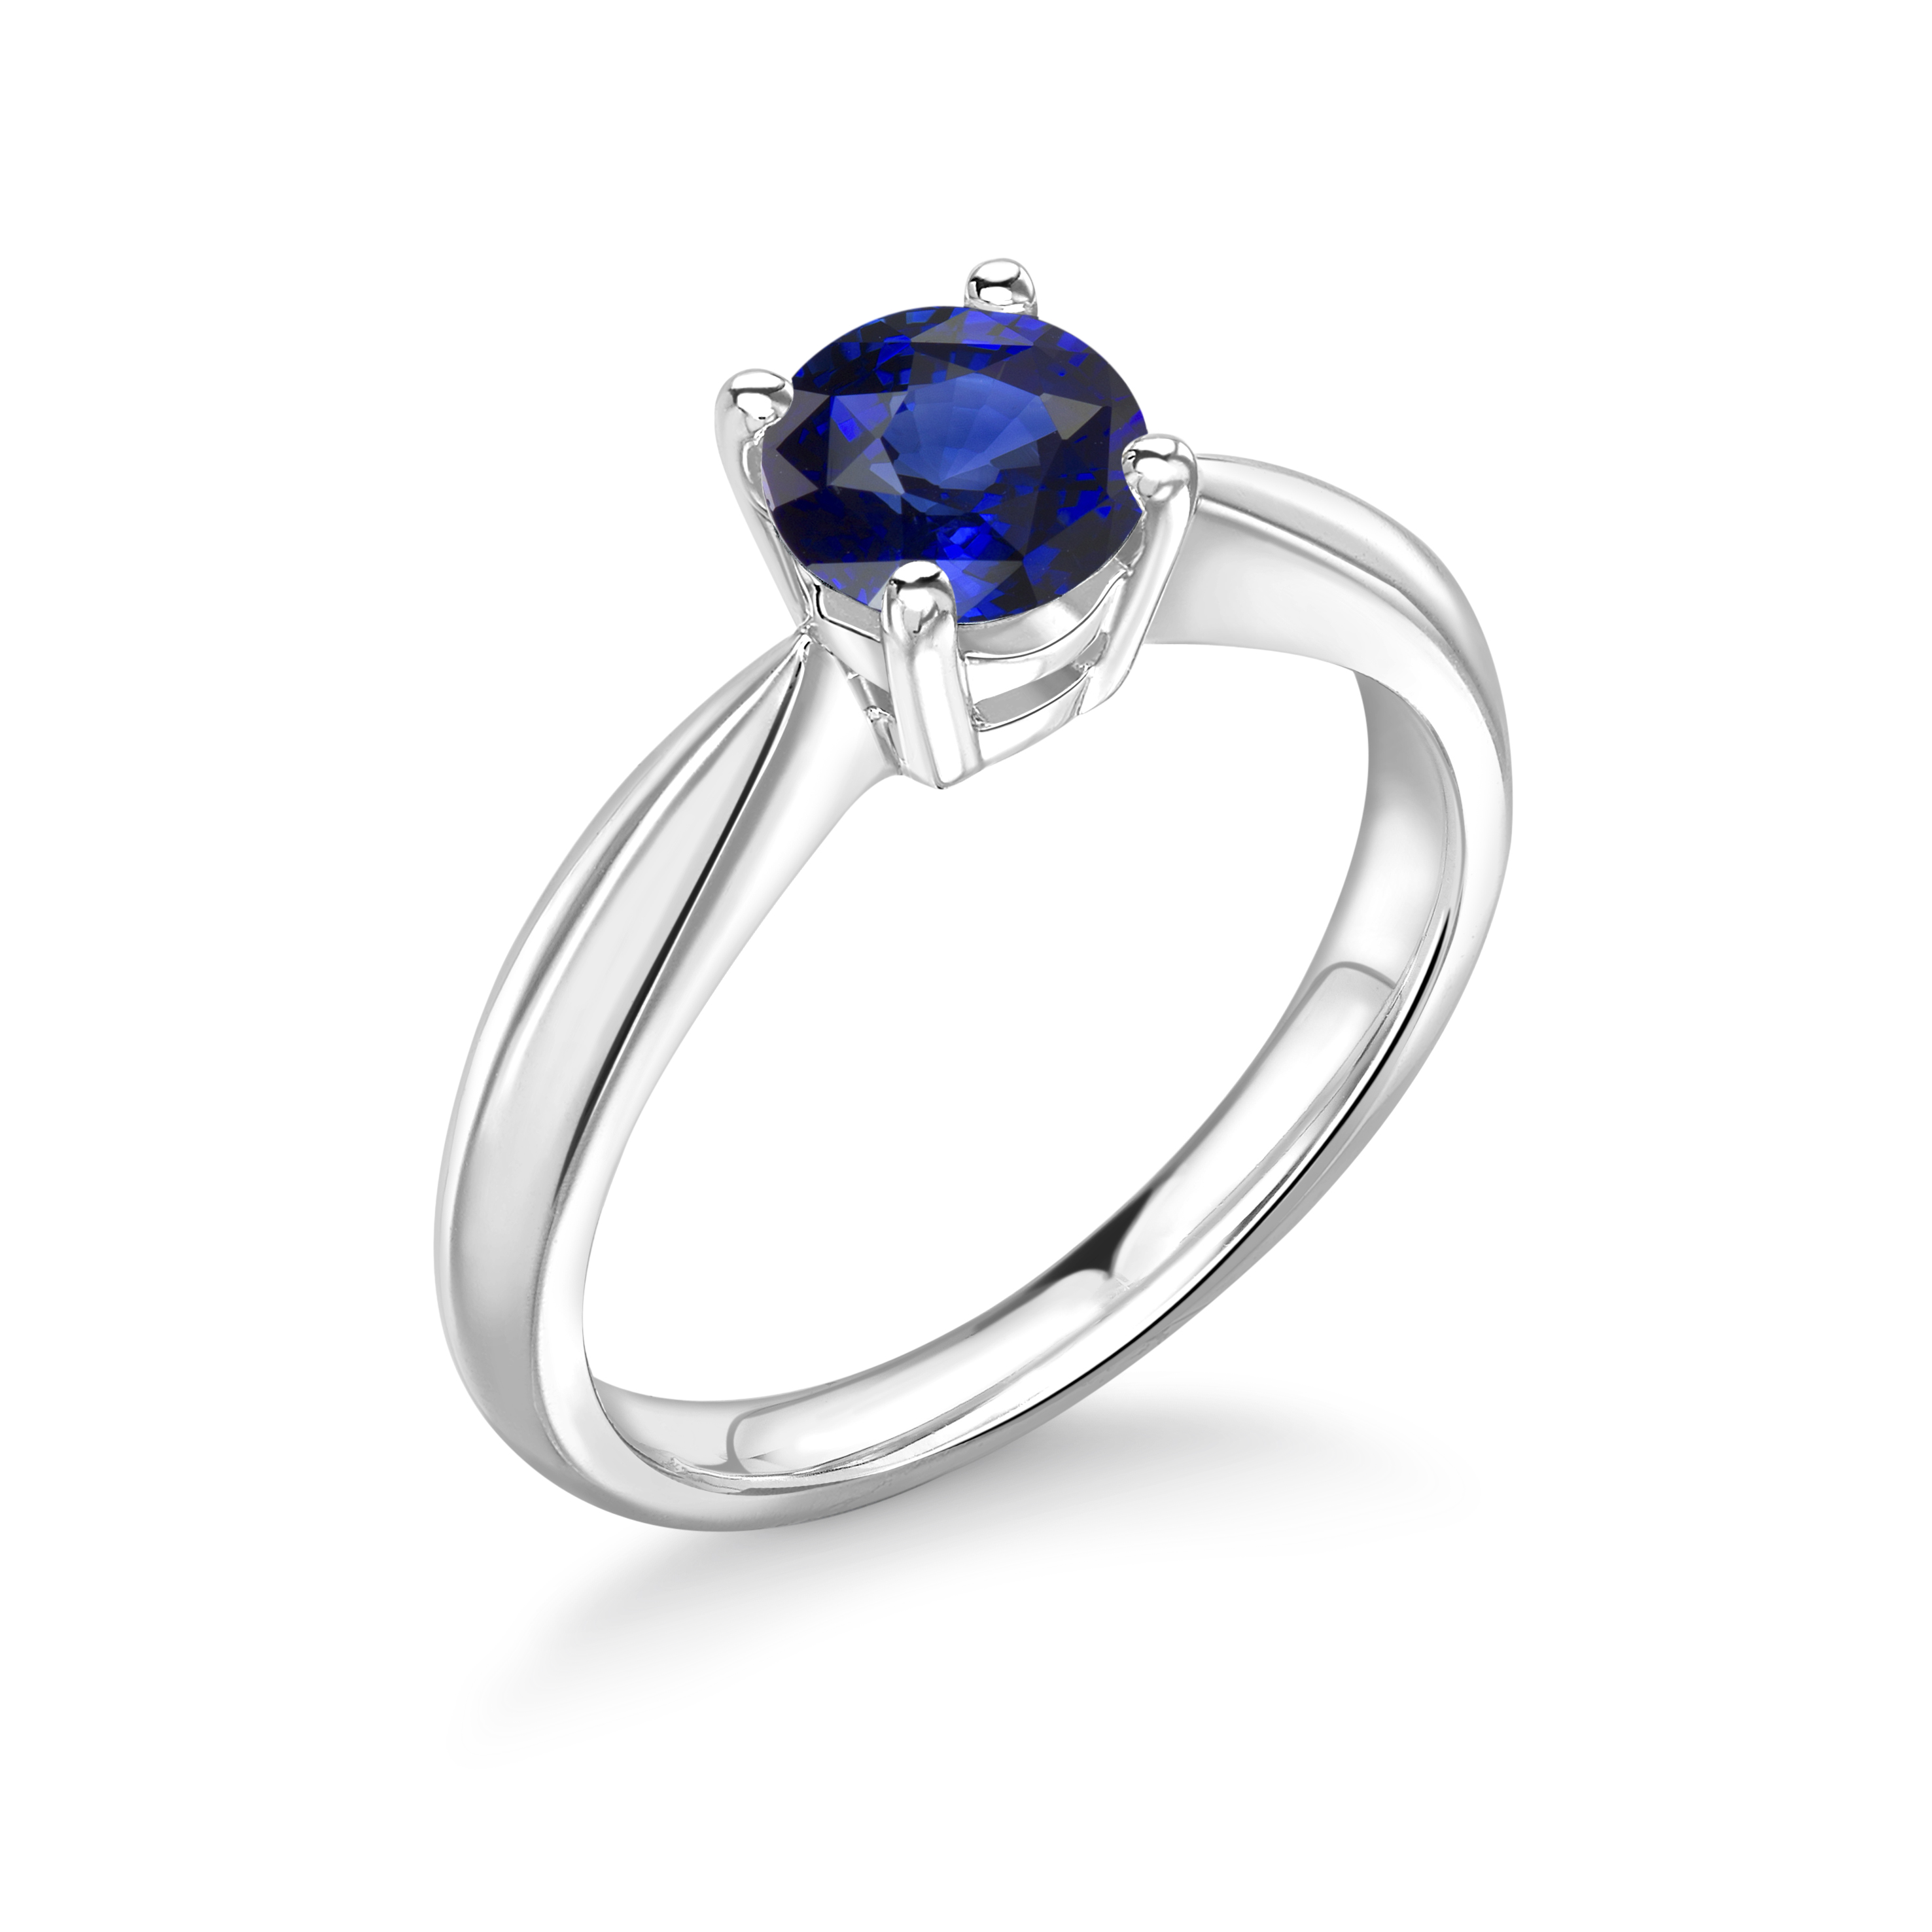 Elegant 4 Prong Set Round Solitaire Sapphire Engagement Rings 